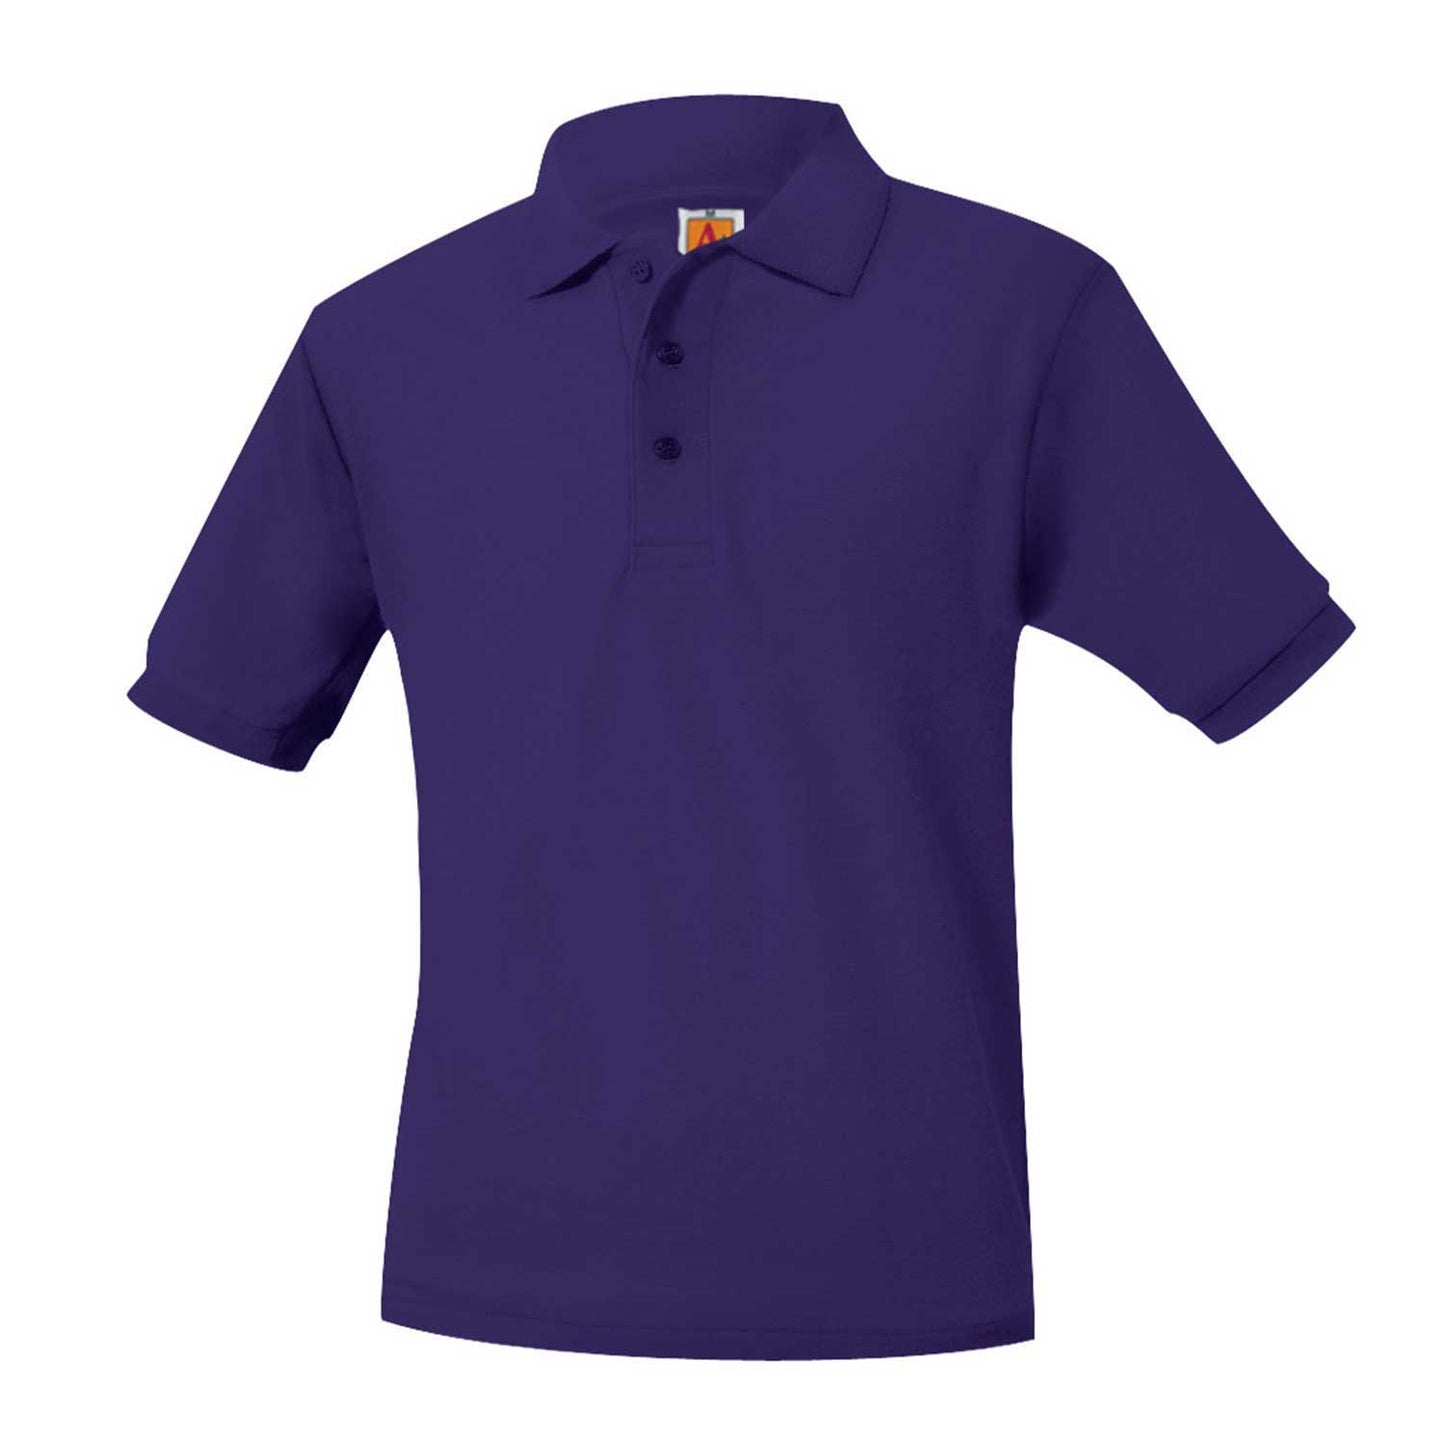 Adult Short Sleeved Pique Polo With CAC Logo